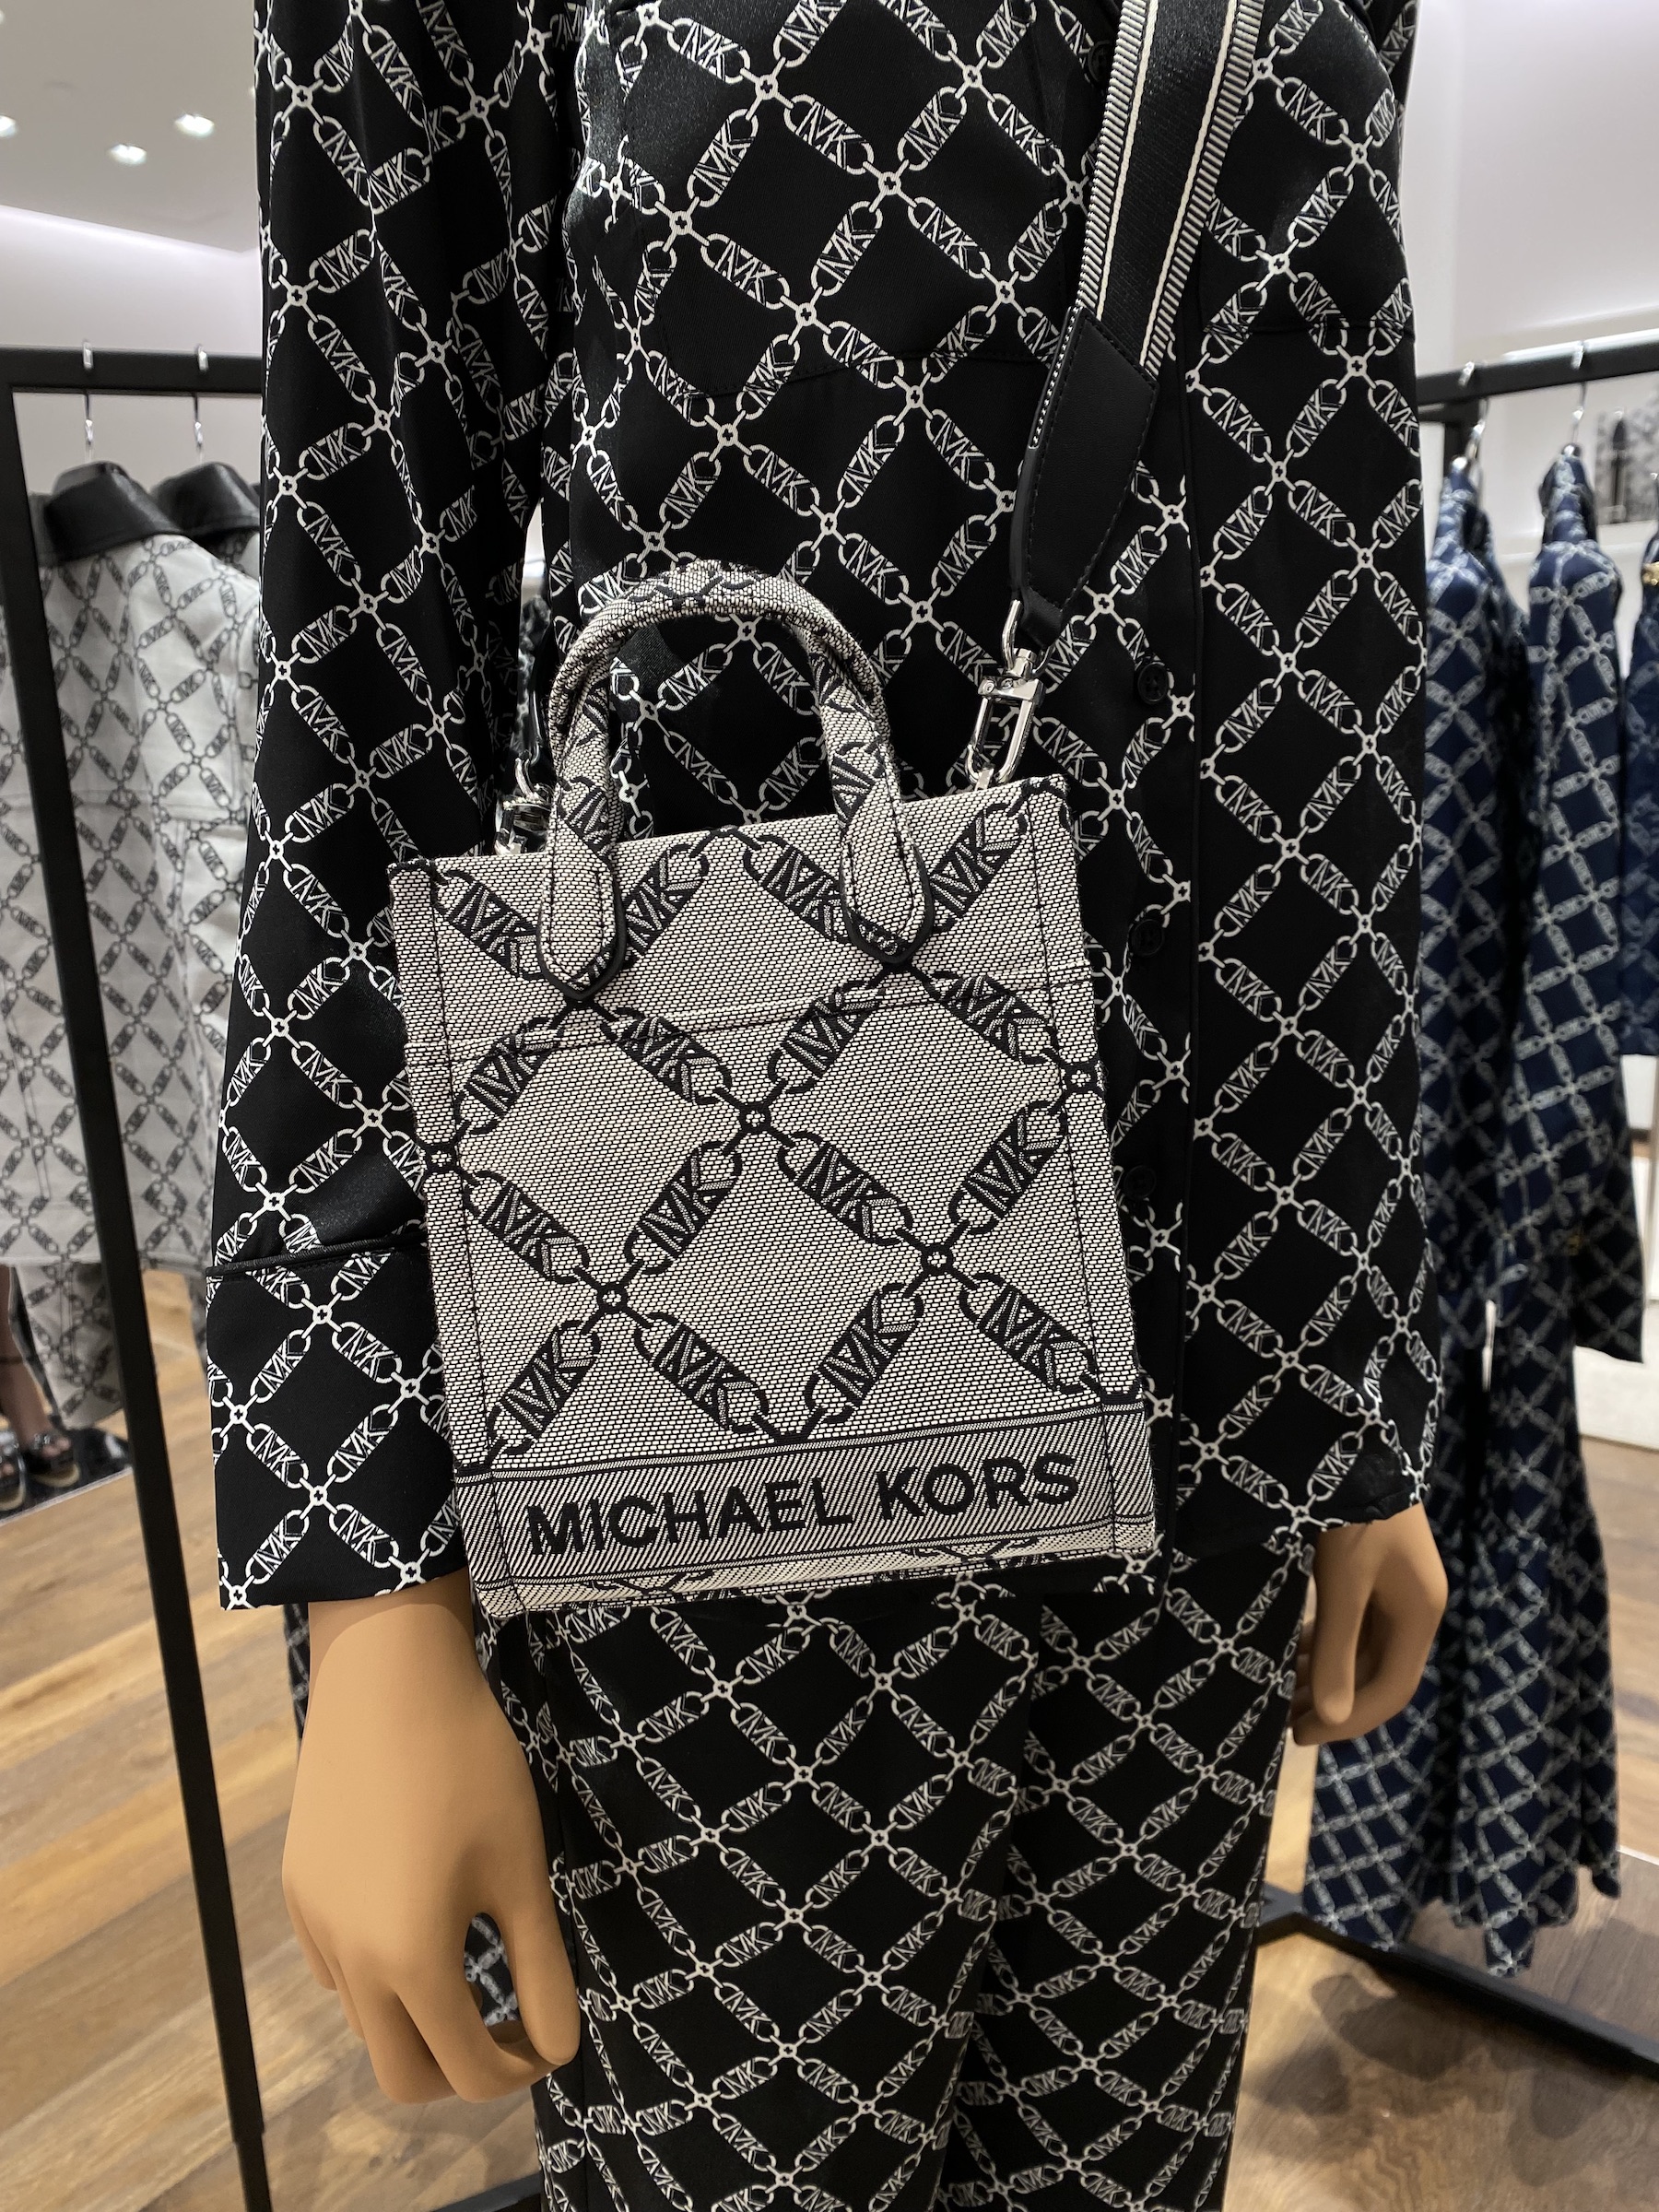 Michael Kors Unveils a Stunning New Store Concept in Vancouver